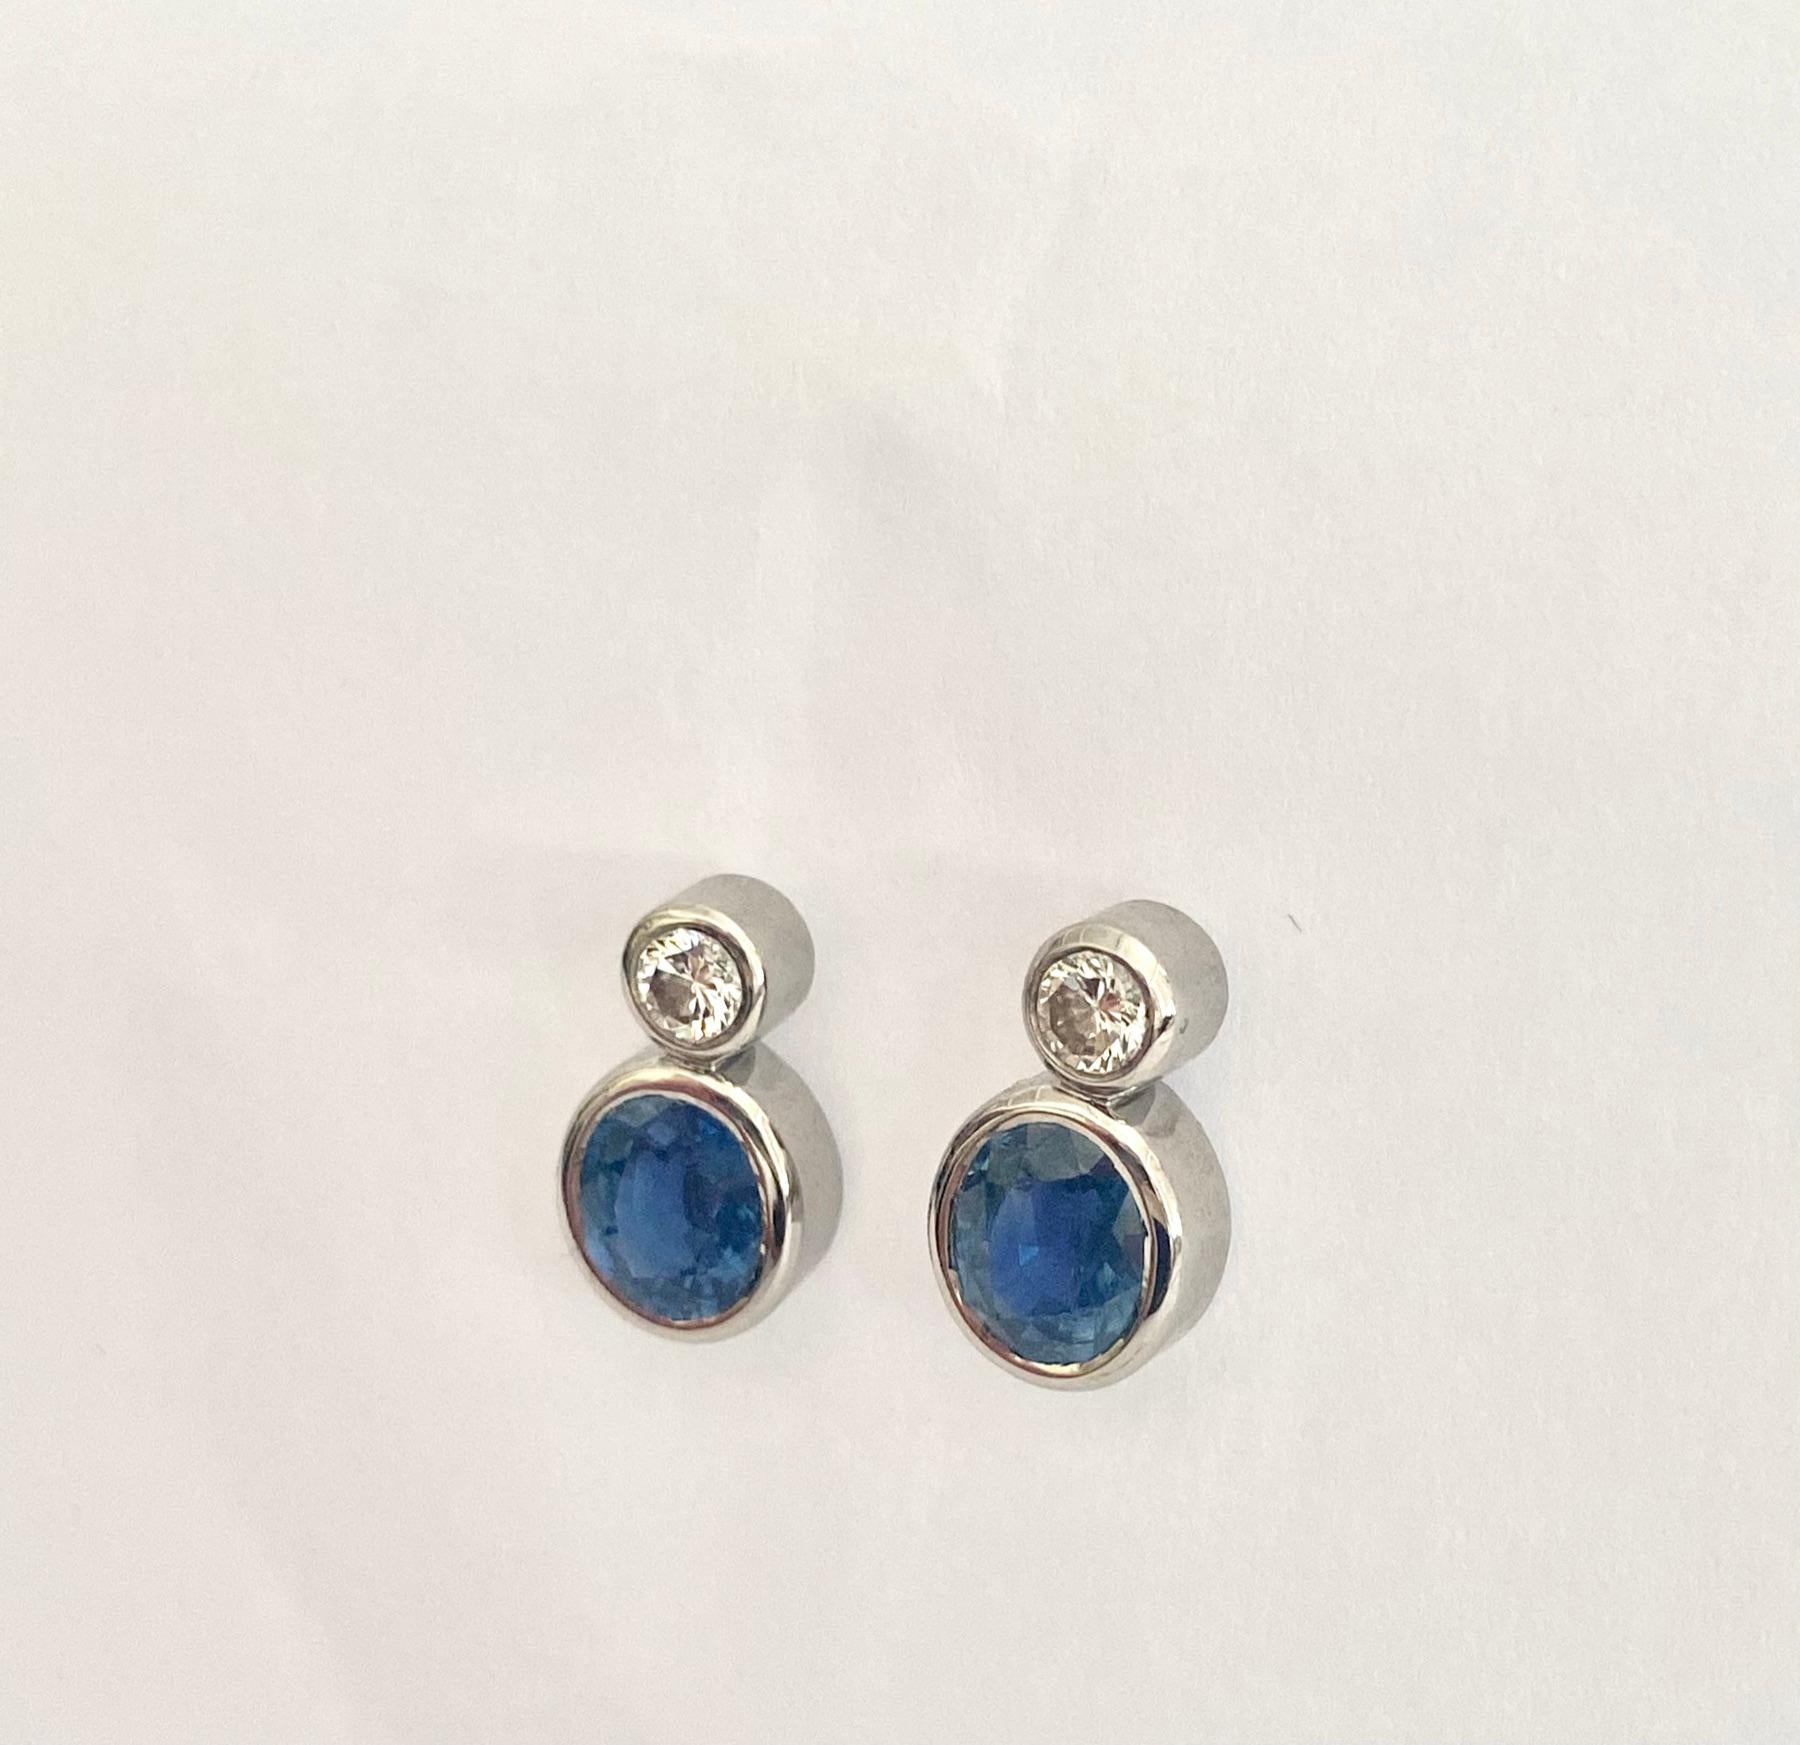 A pair of 18K. white gold earrings.
Natural Sapphires: 2.80 ct.
natural brilliant cut diamonds: 0.30 ct VVS/F-G
Manual work,
Comes with an independent certificate from ALGT (Antwerp)
Weight: 5.44 grams
size: 14mm x 8mm x 4mm